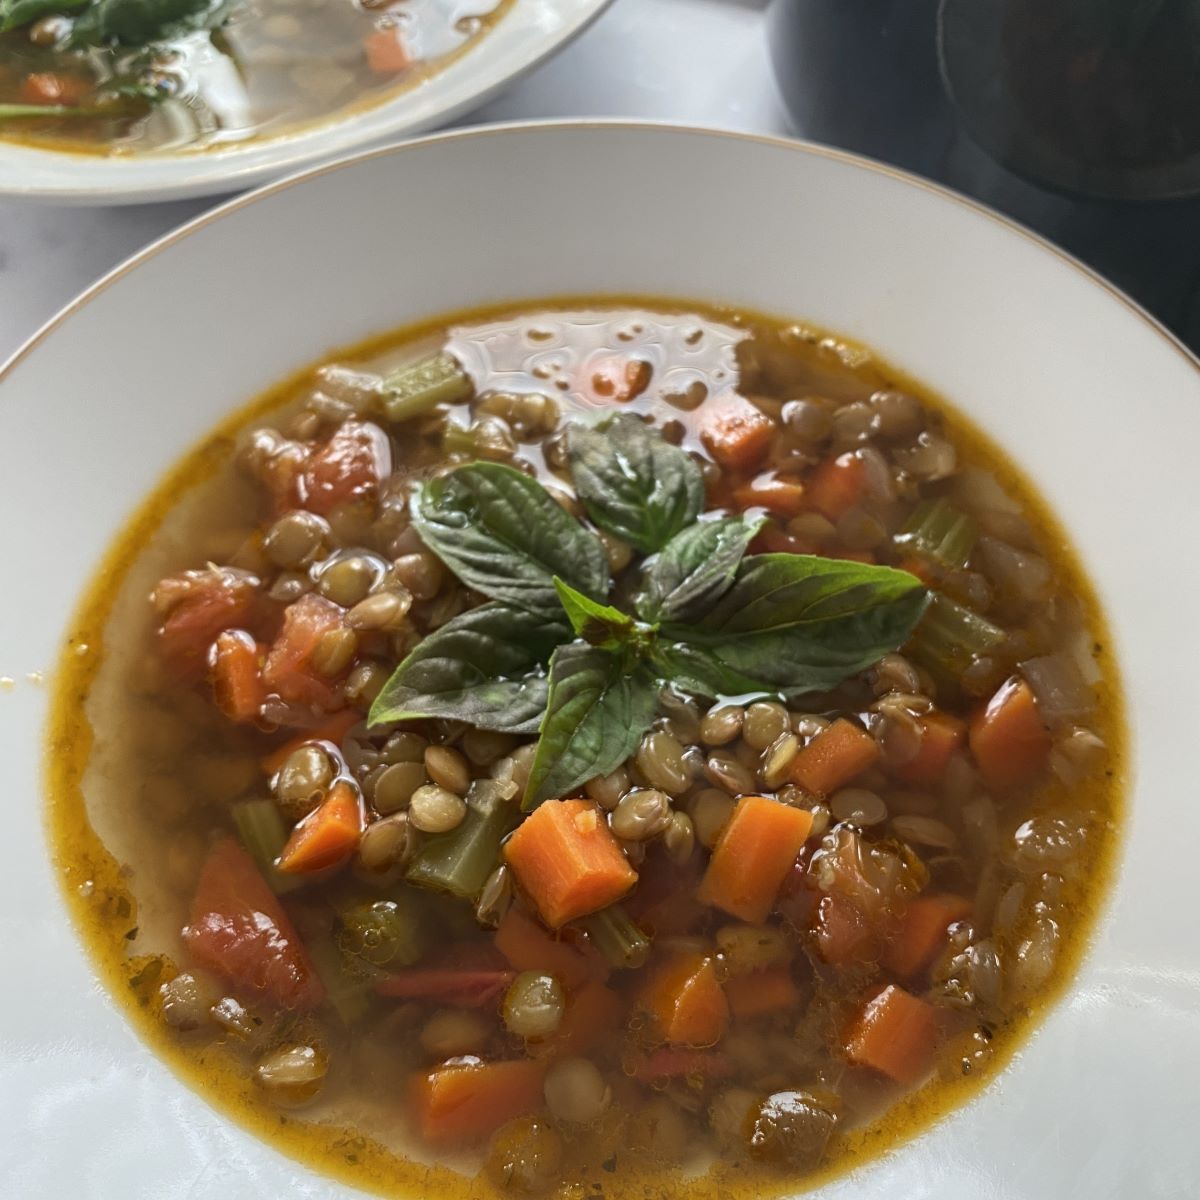 Lentil and Carrot Soup in a White Plate